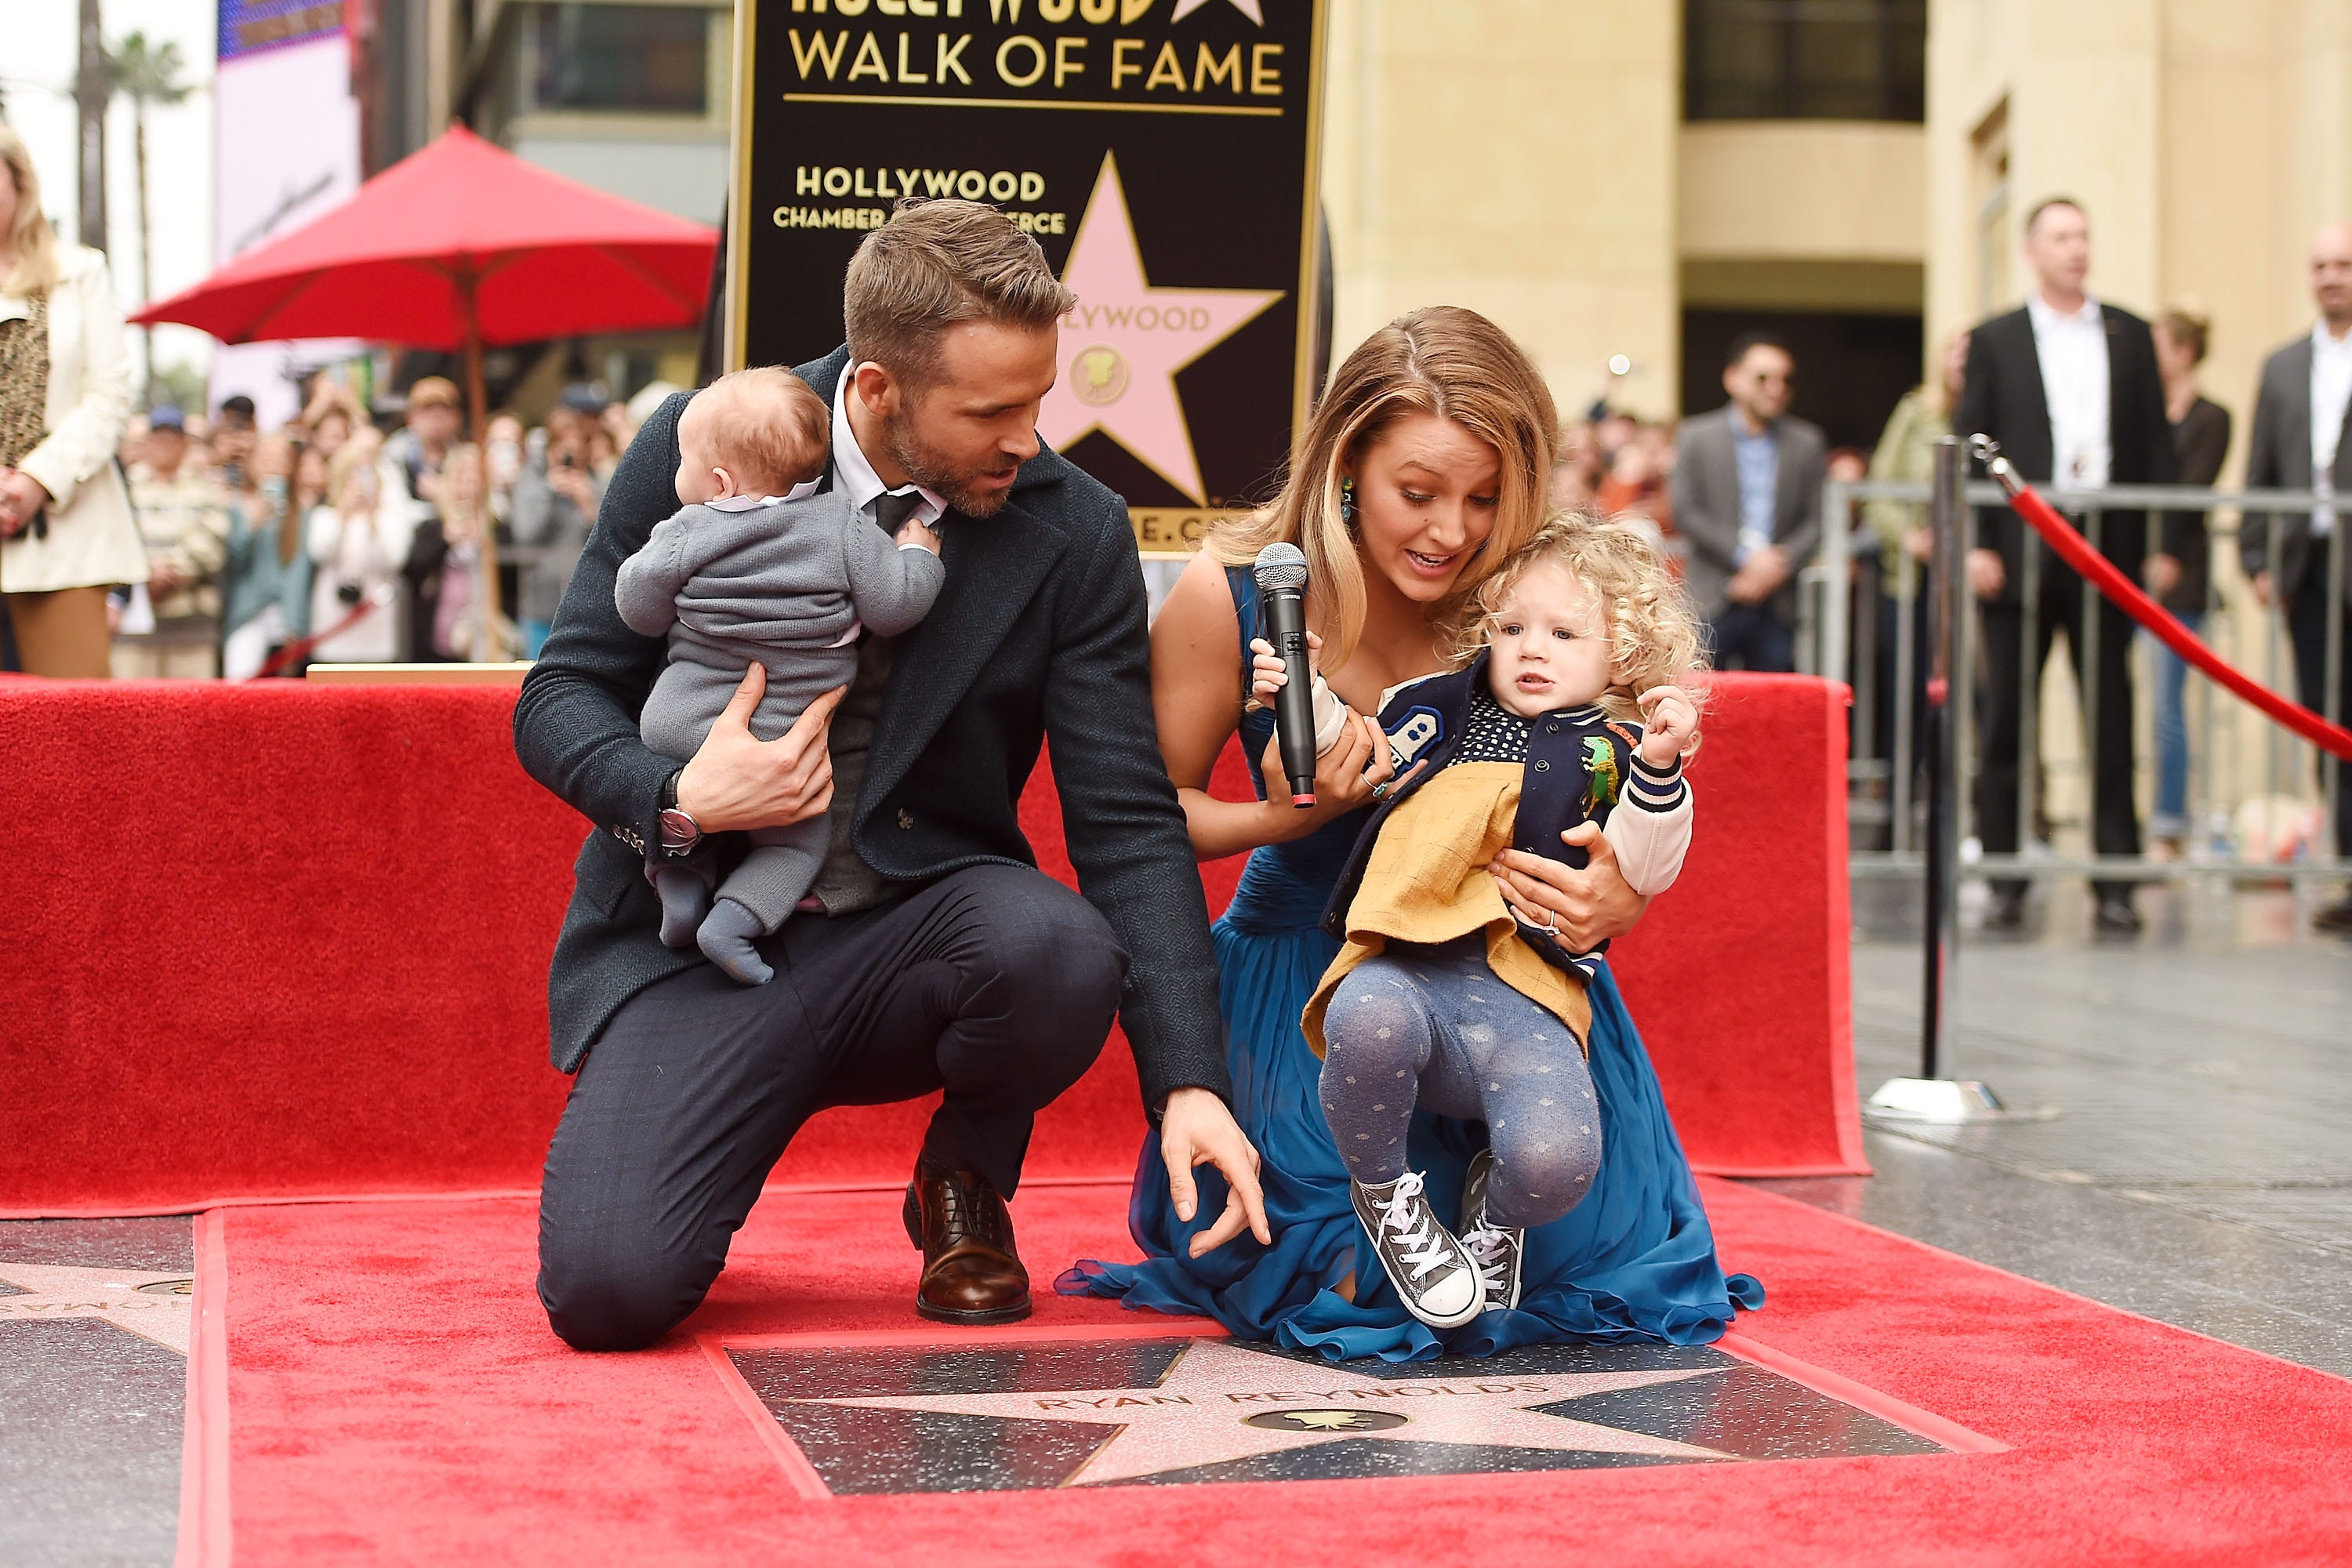 It was a family affair for Ryan Reynold's star ceremony in December 2016. He posed with his young daughters and wife, actress Blake Lively.